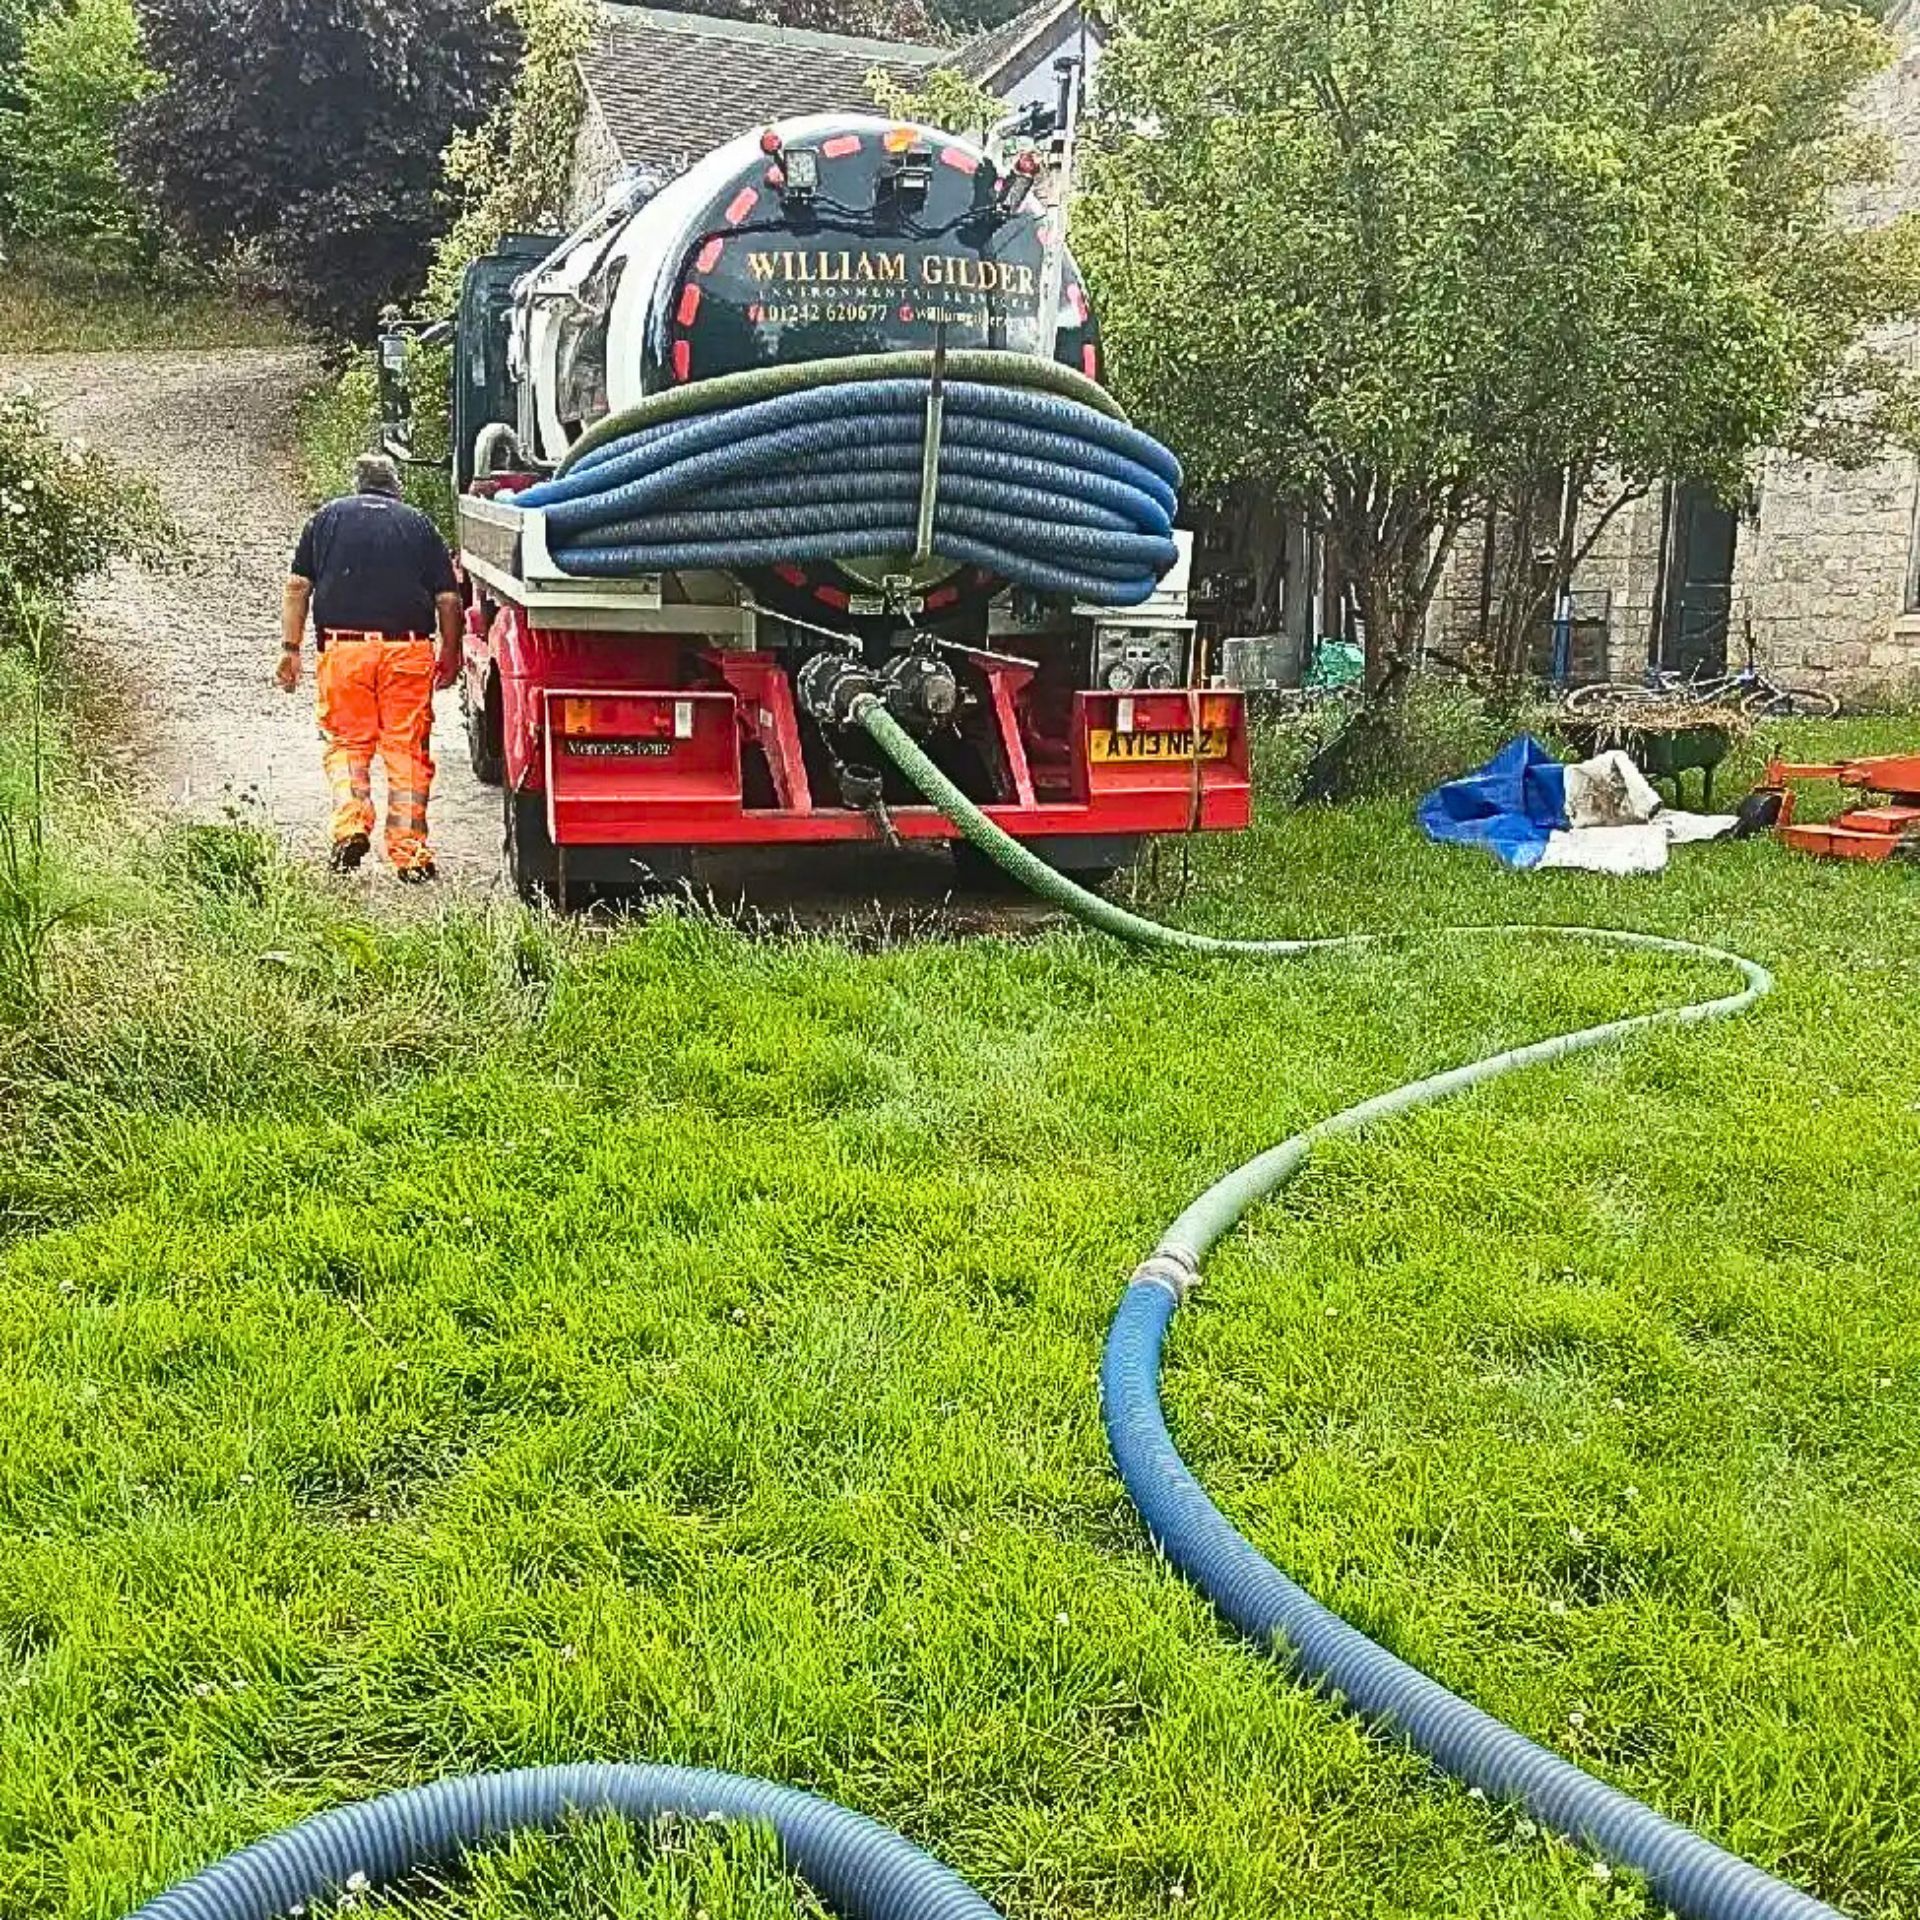 A sewage cleaning lorry, seen from rear